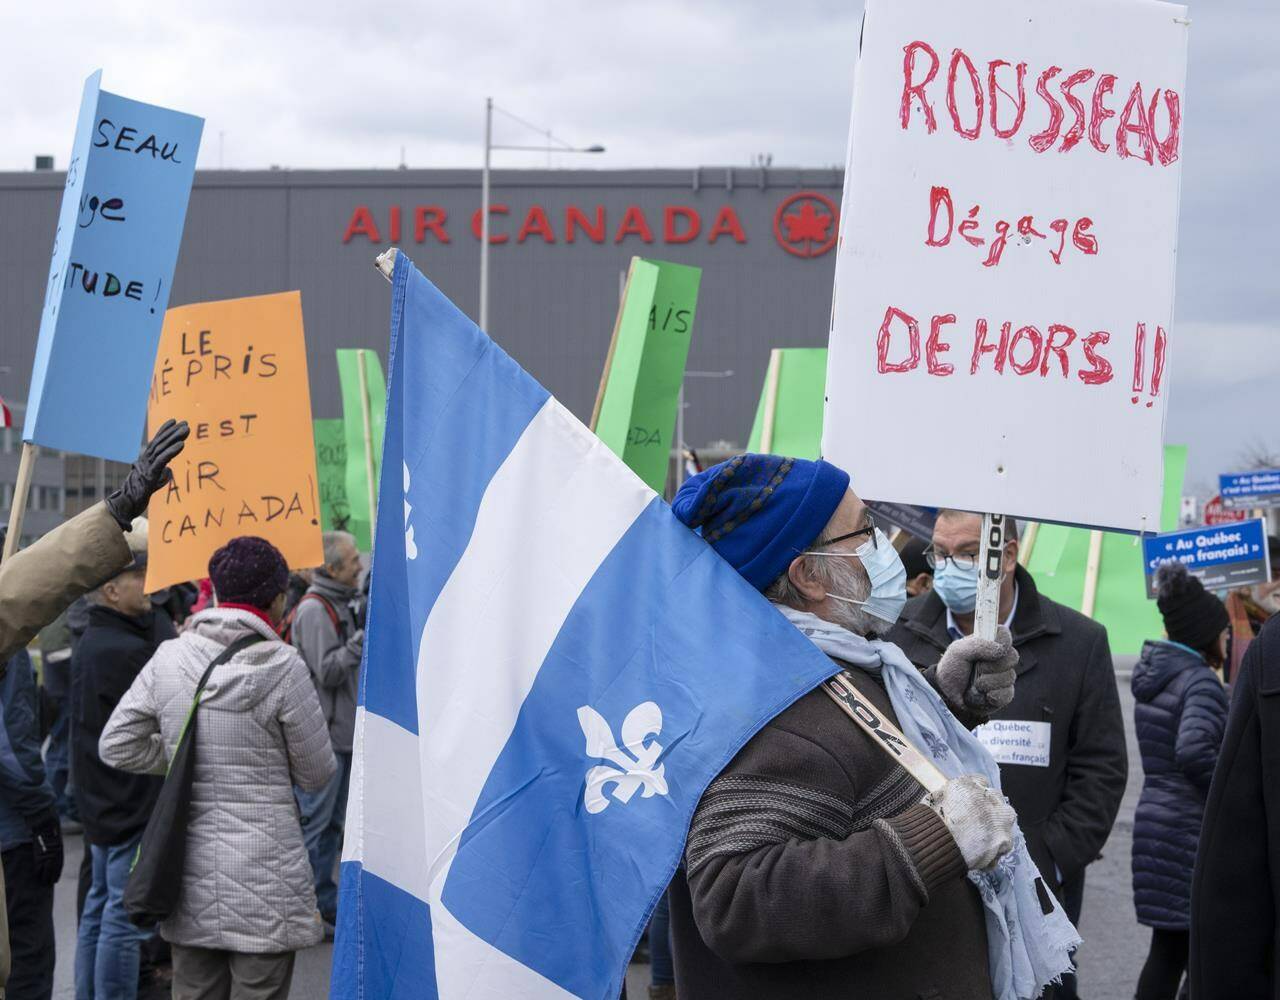 French language advocates protest Air Canada’s chief executive Michael Rousseau’s inability to speak French in front of the airline’s head office during a demonstration in Montreal, Saturday, Nov. 13, 2021. The Commissioner of Official Languages says a preliminary report into whether a speech by the chief executive of Air Canada in November met the airline’s obligations under the Official Languages Act has established that the complaints are founded. THE CANADIAN PRESS/Ryan Remiorz